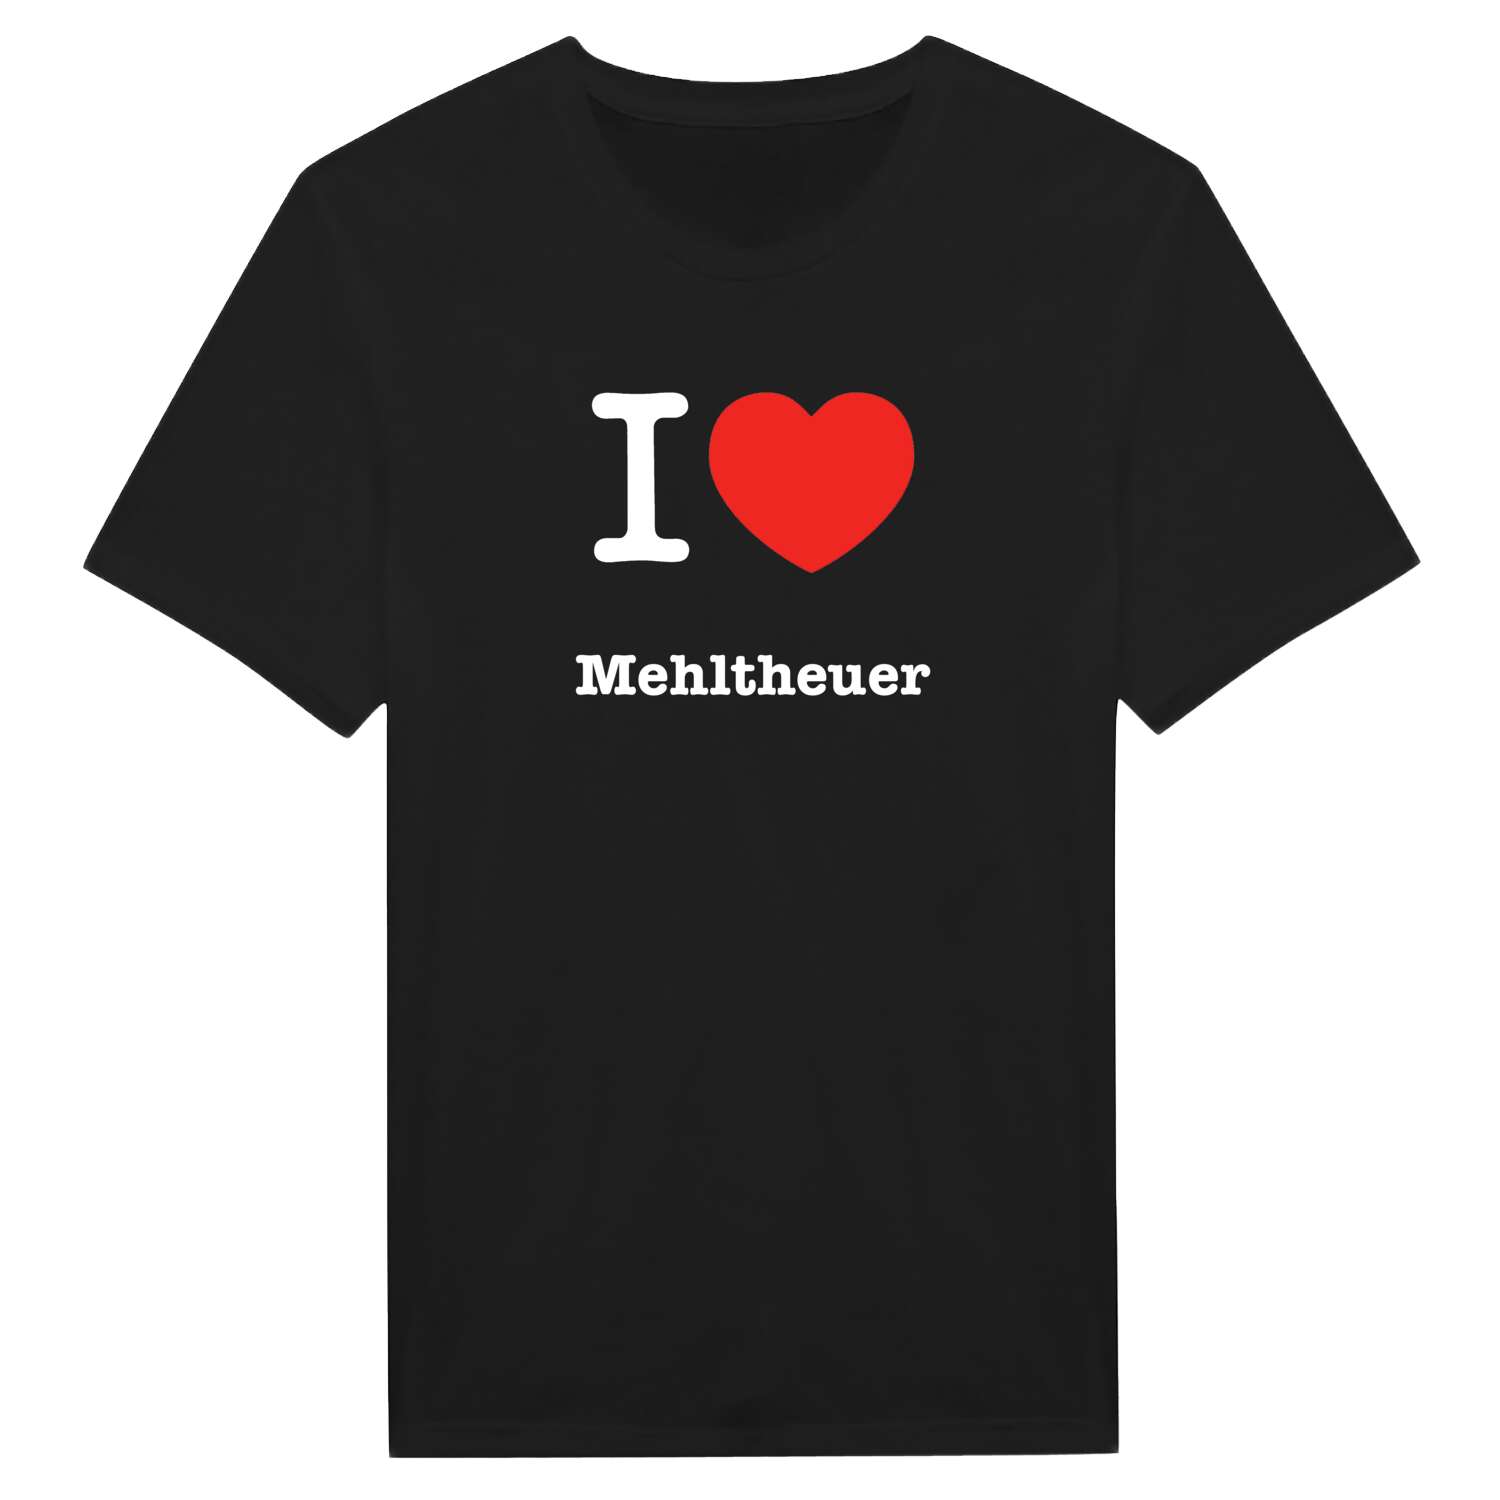 Mehltheuer T-Shirt »I love«